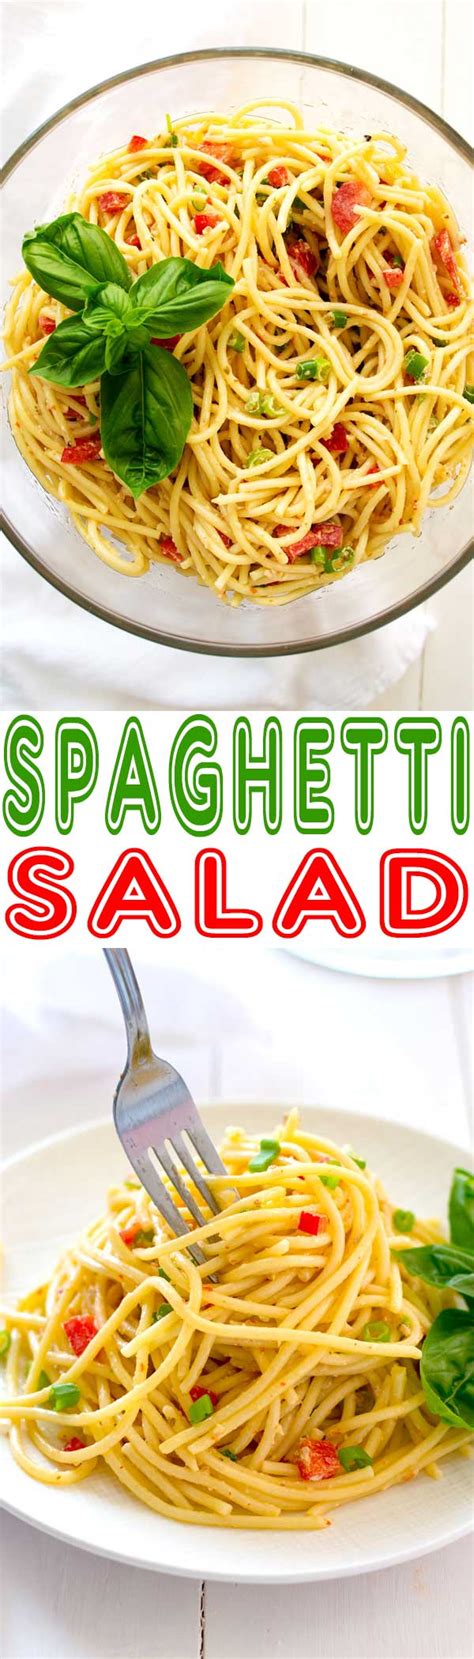 Bring a large pot of salted water to a boil. Spaghetti Salad with Italian Dressing - Kitchen Gidget